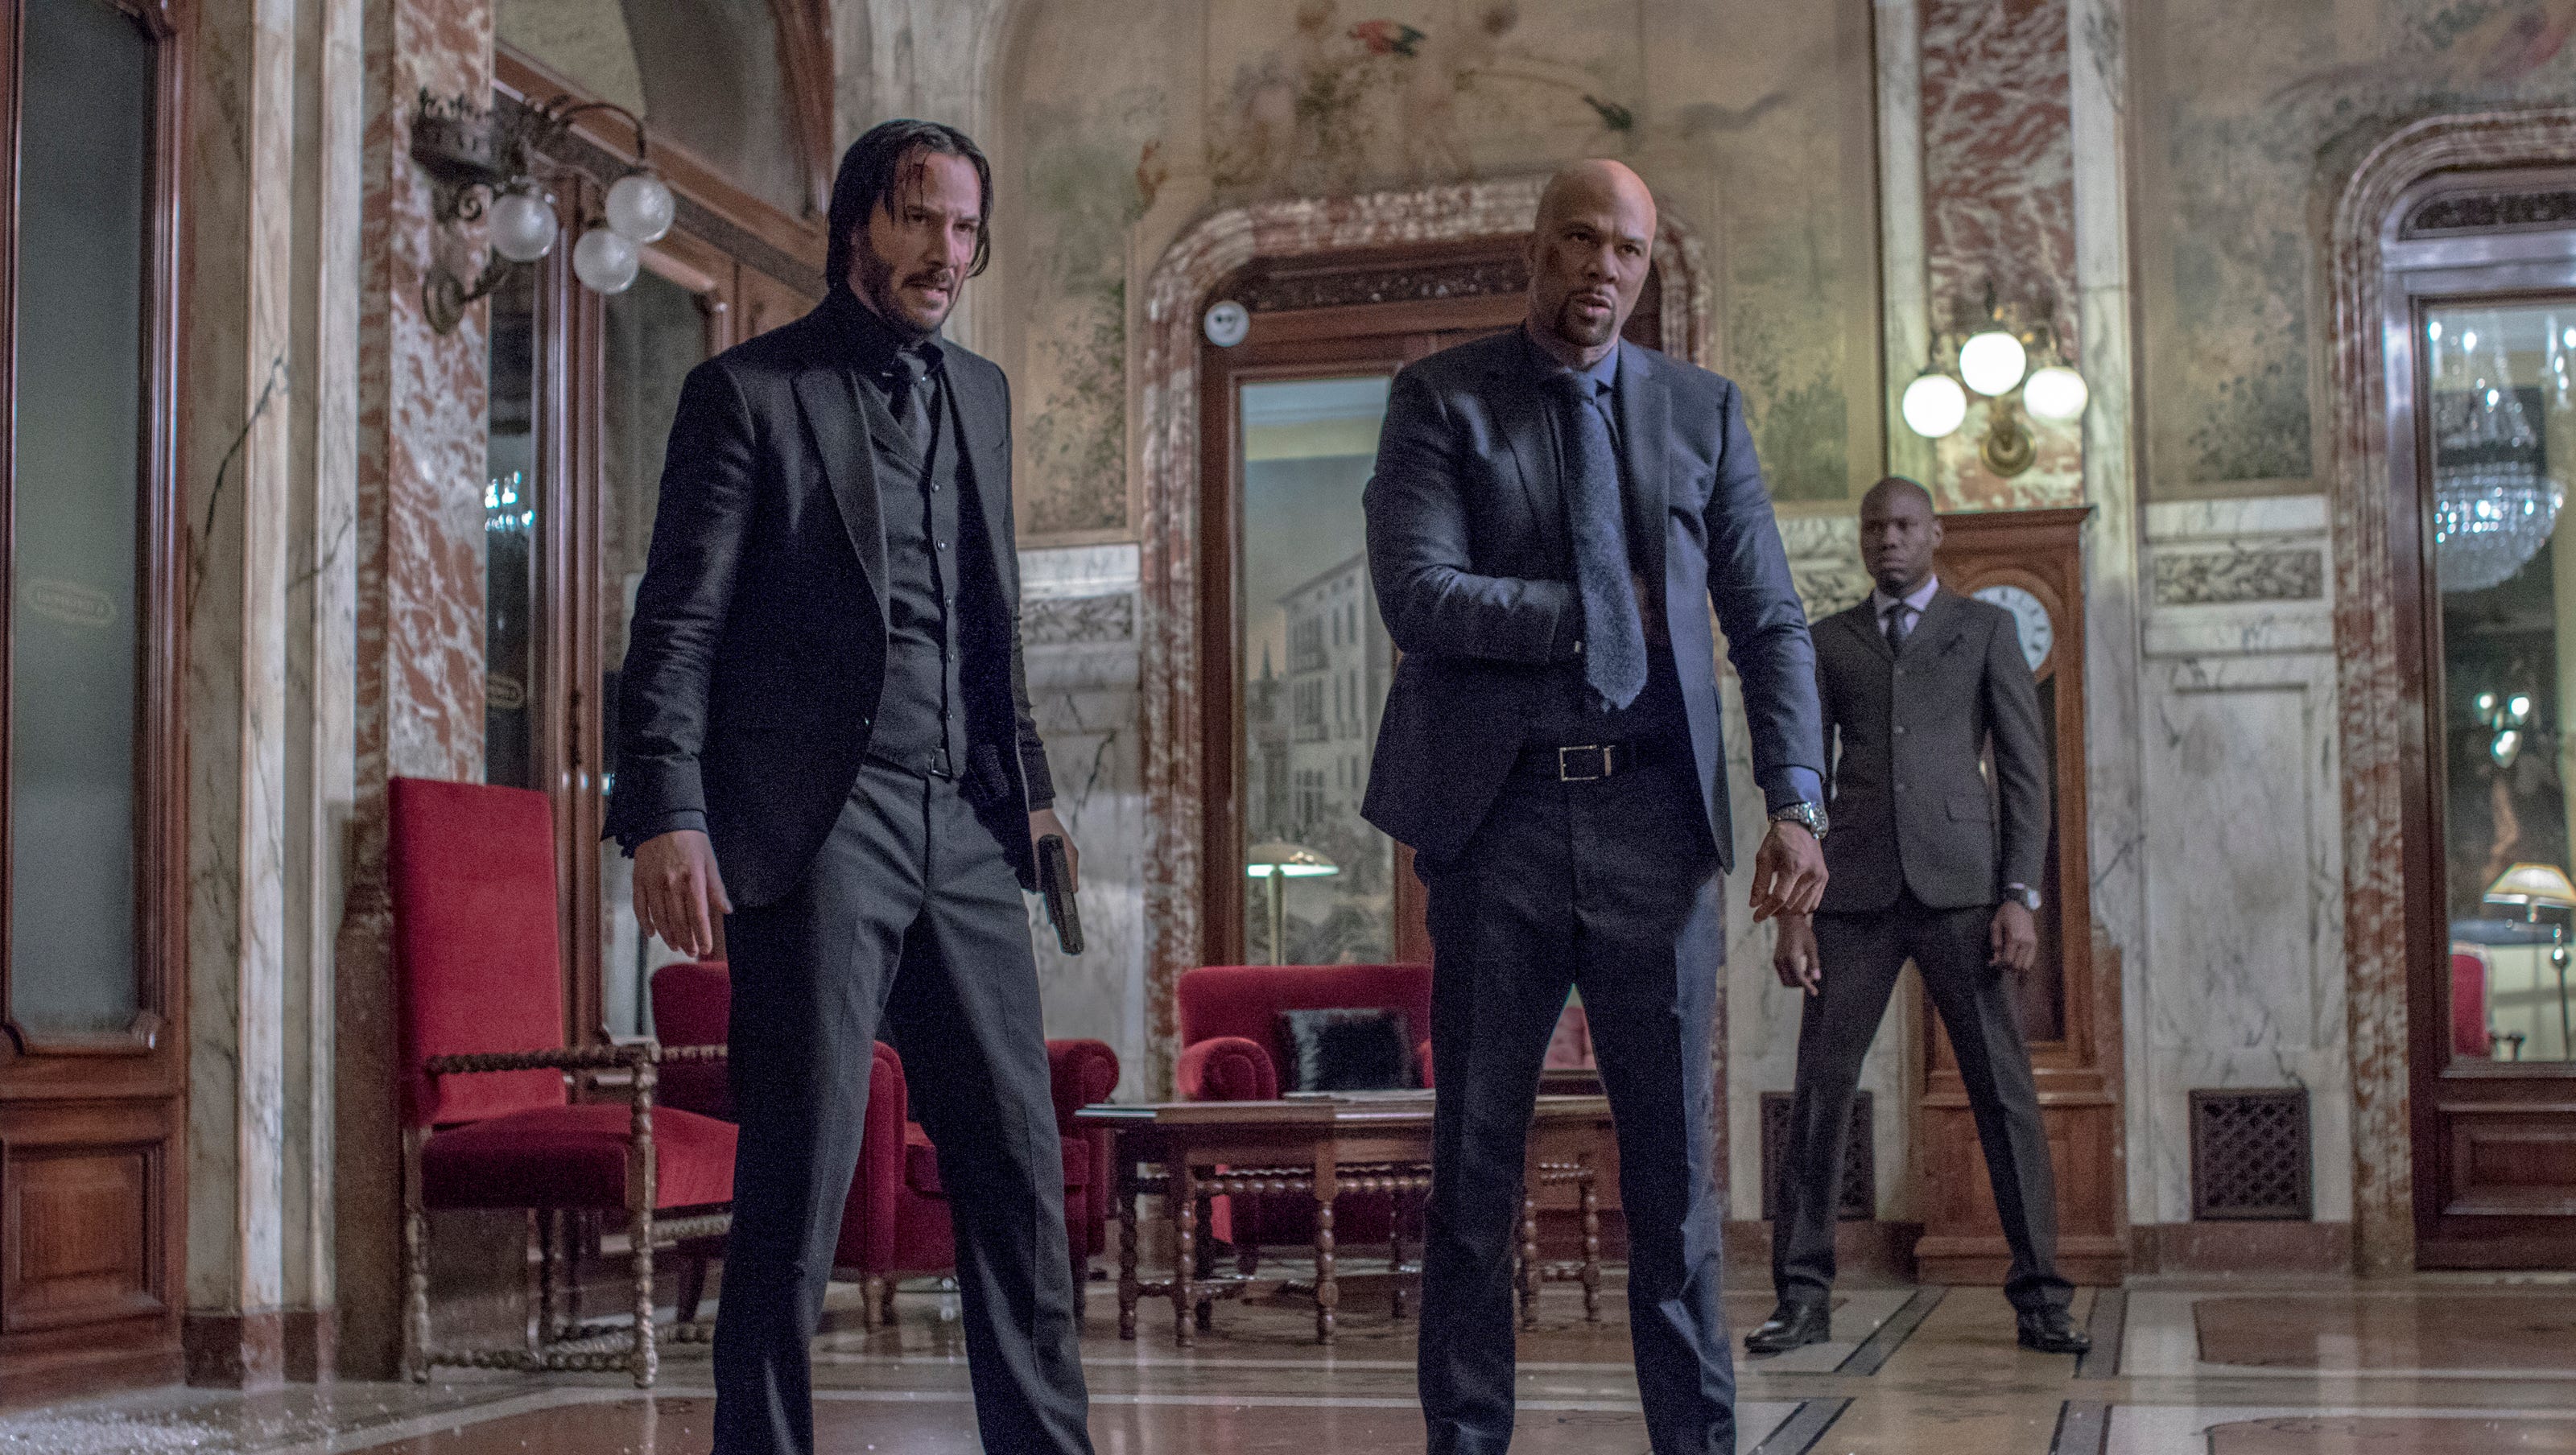 Common did not let Keanu Reeves see his pain in 'John Wick: Chapter 2'